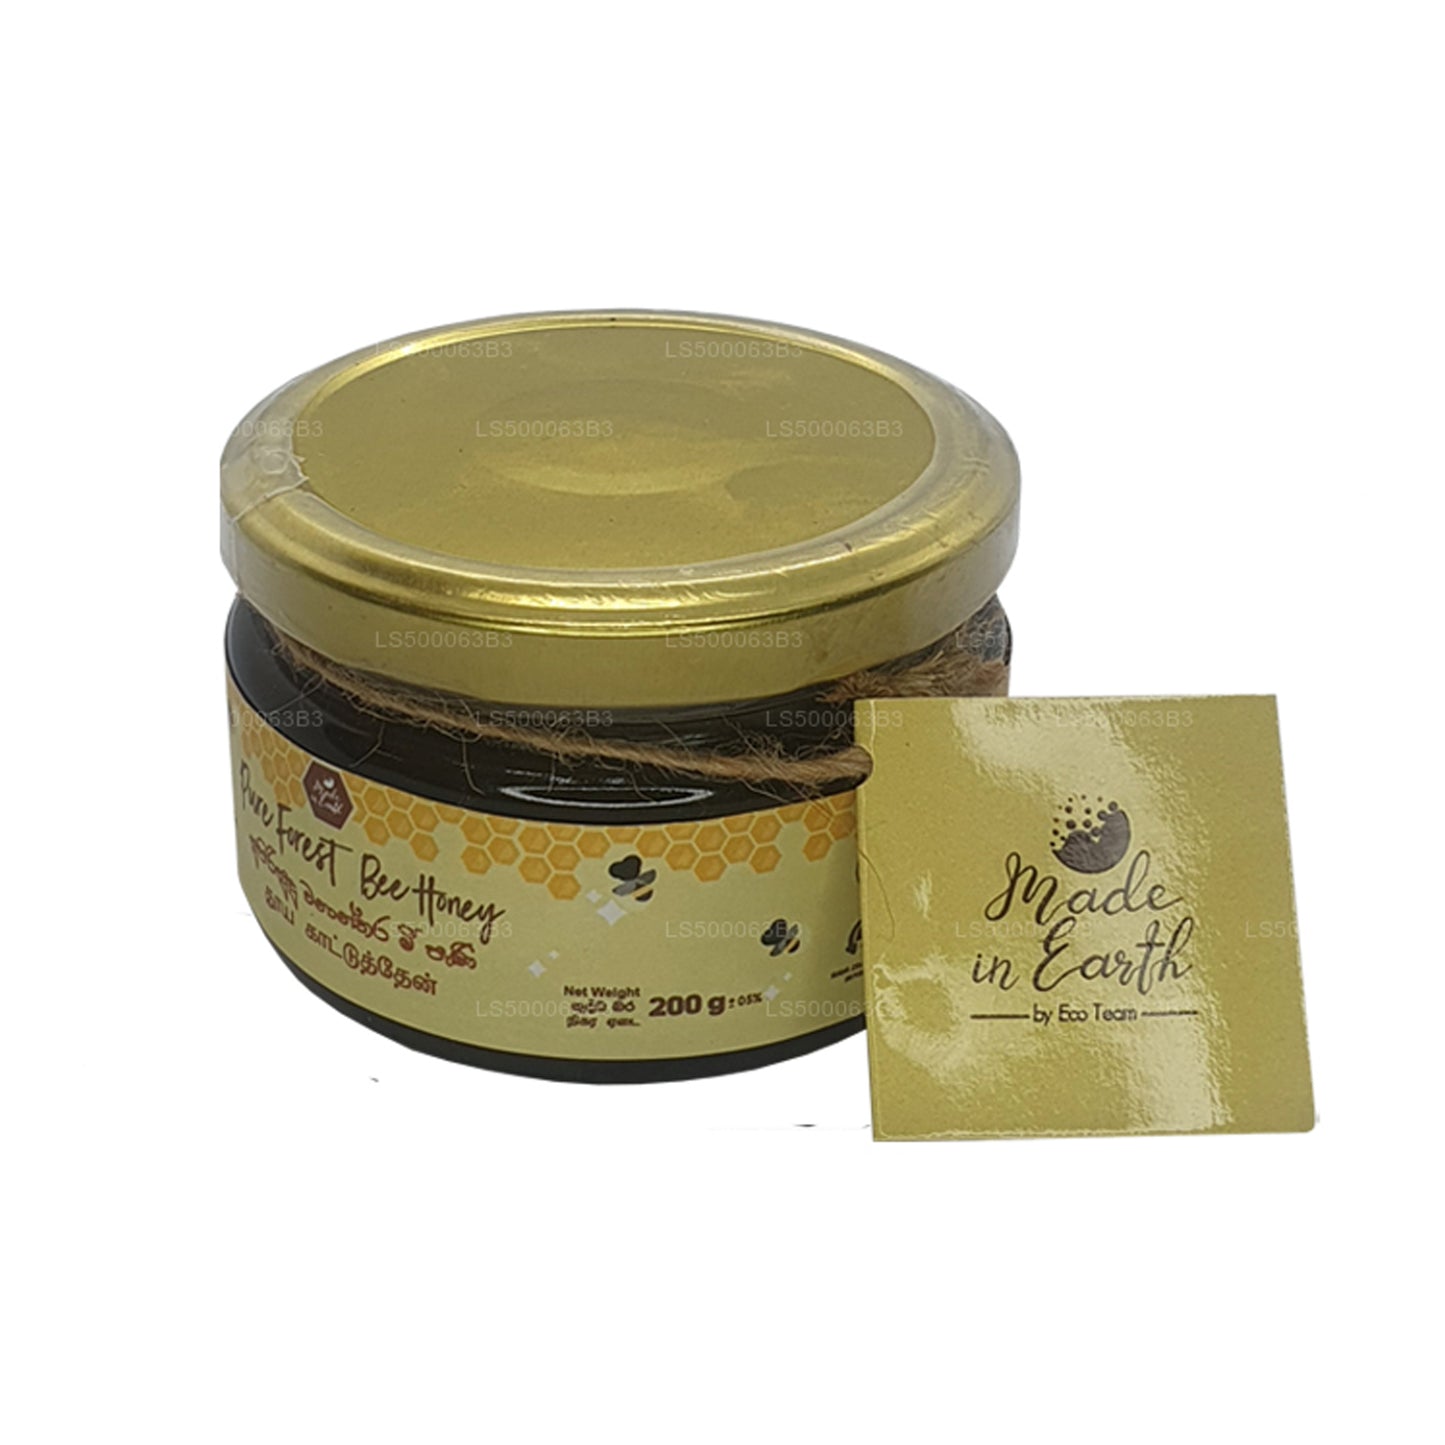 Made in Earth Pure Forest Bee Miód (200g)